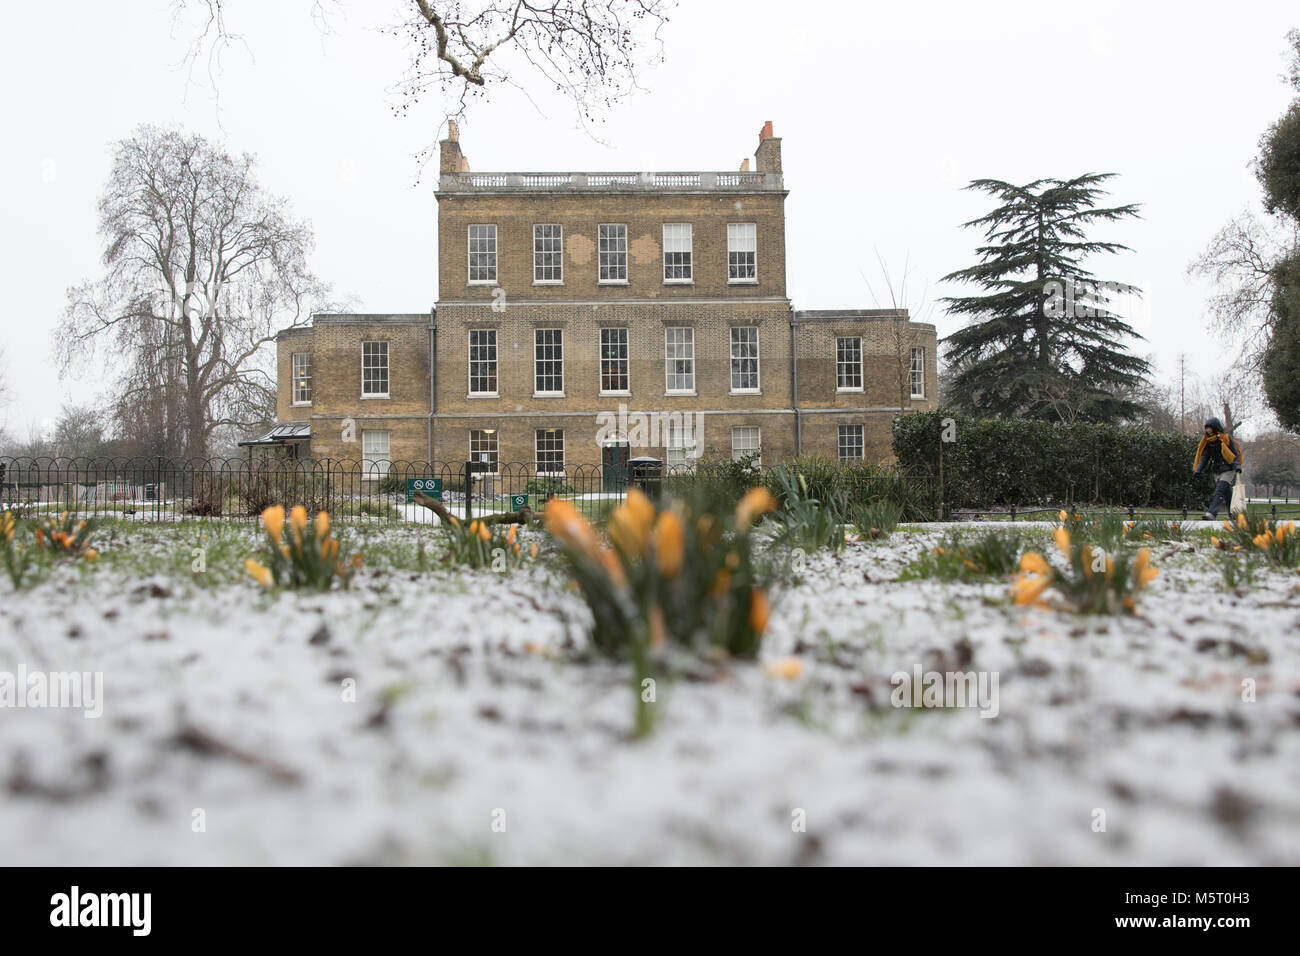 London, UK. 26th February 2018. UK weather. Snow in Stoke Newington, as the so-called 'beast from the east' arrives. Yellow crocuses in the snow in Clissold Park with Clissold House in the background. Credit: Carol Moir/Alamy Live News. Stock Photo